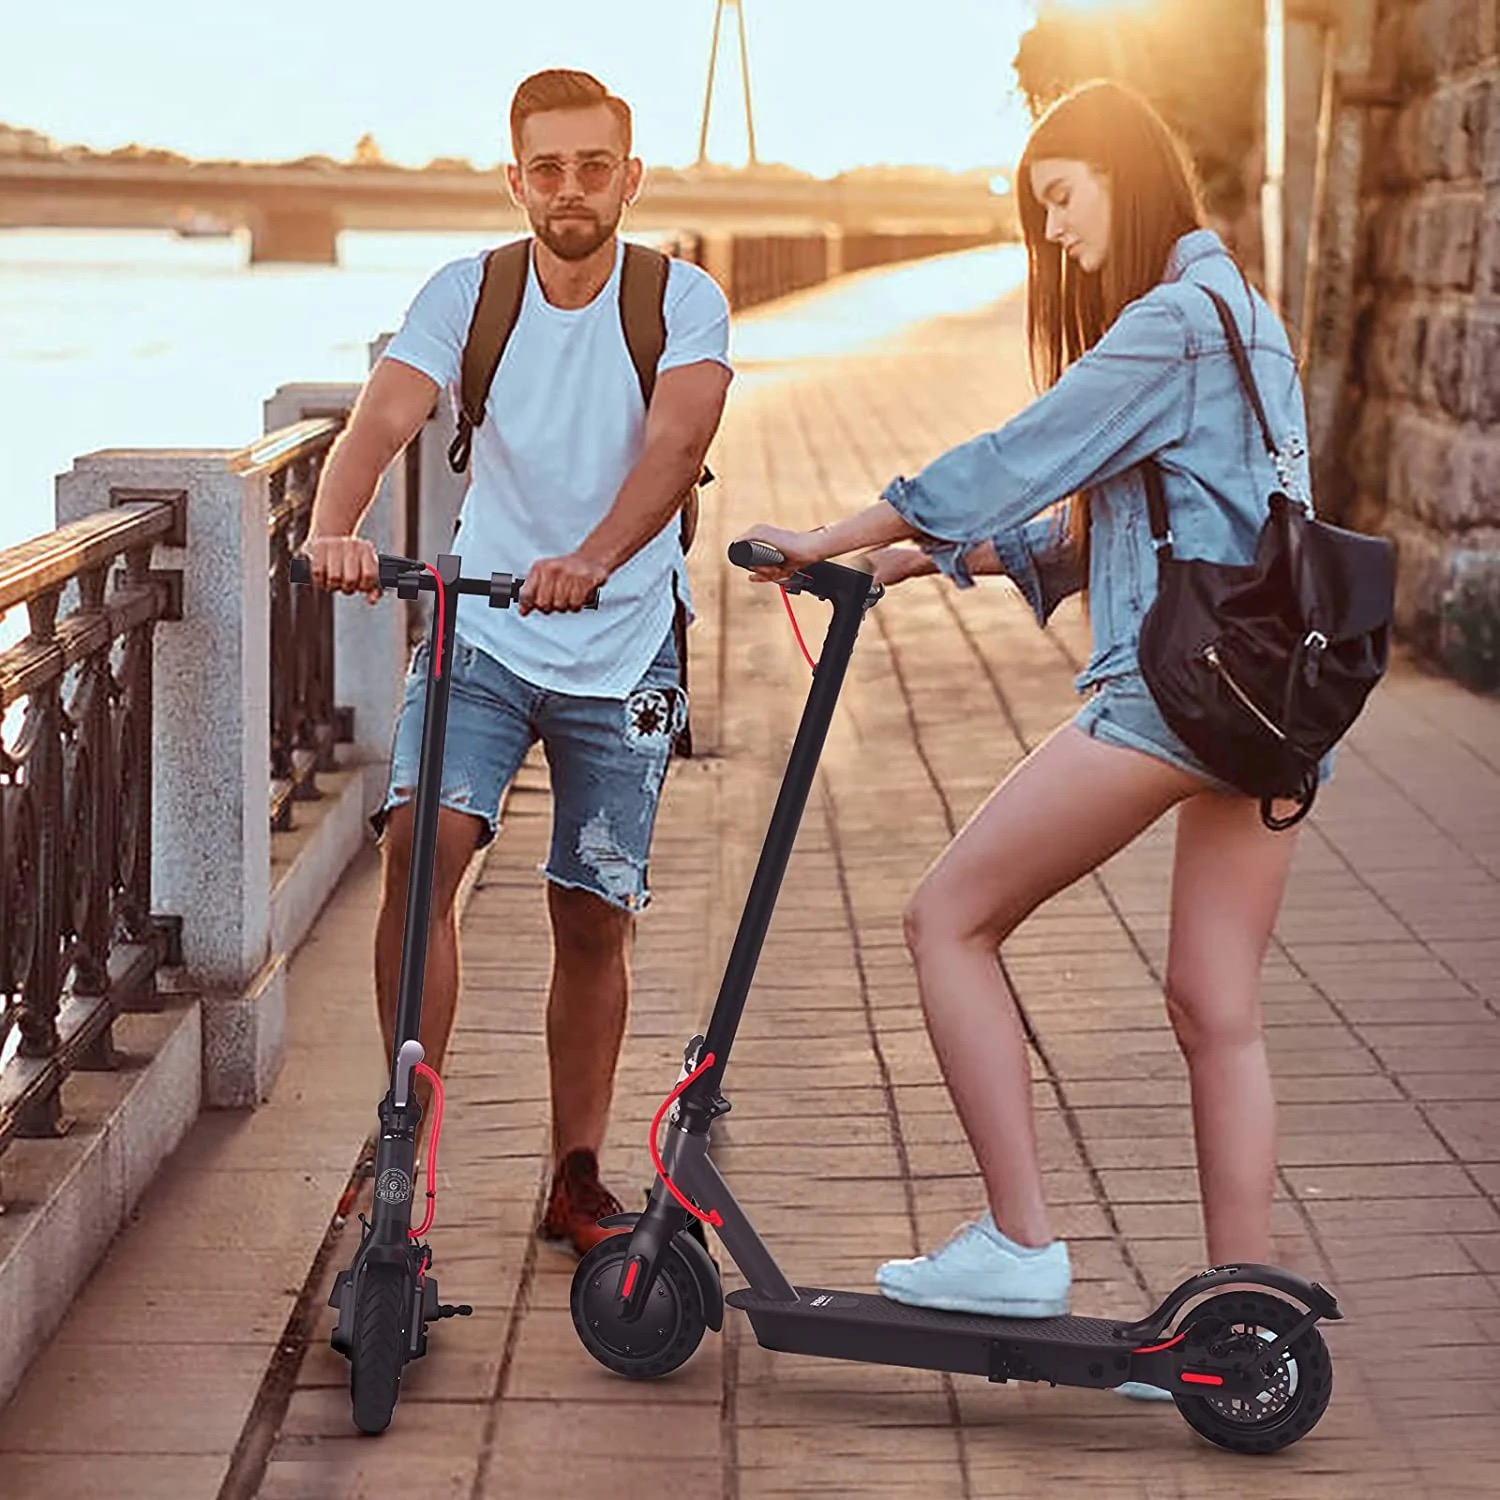 Electric Scooter Reviews | eScooter Reviews Over 200 Scooters Reviewed